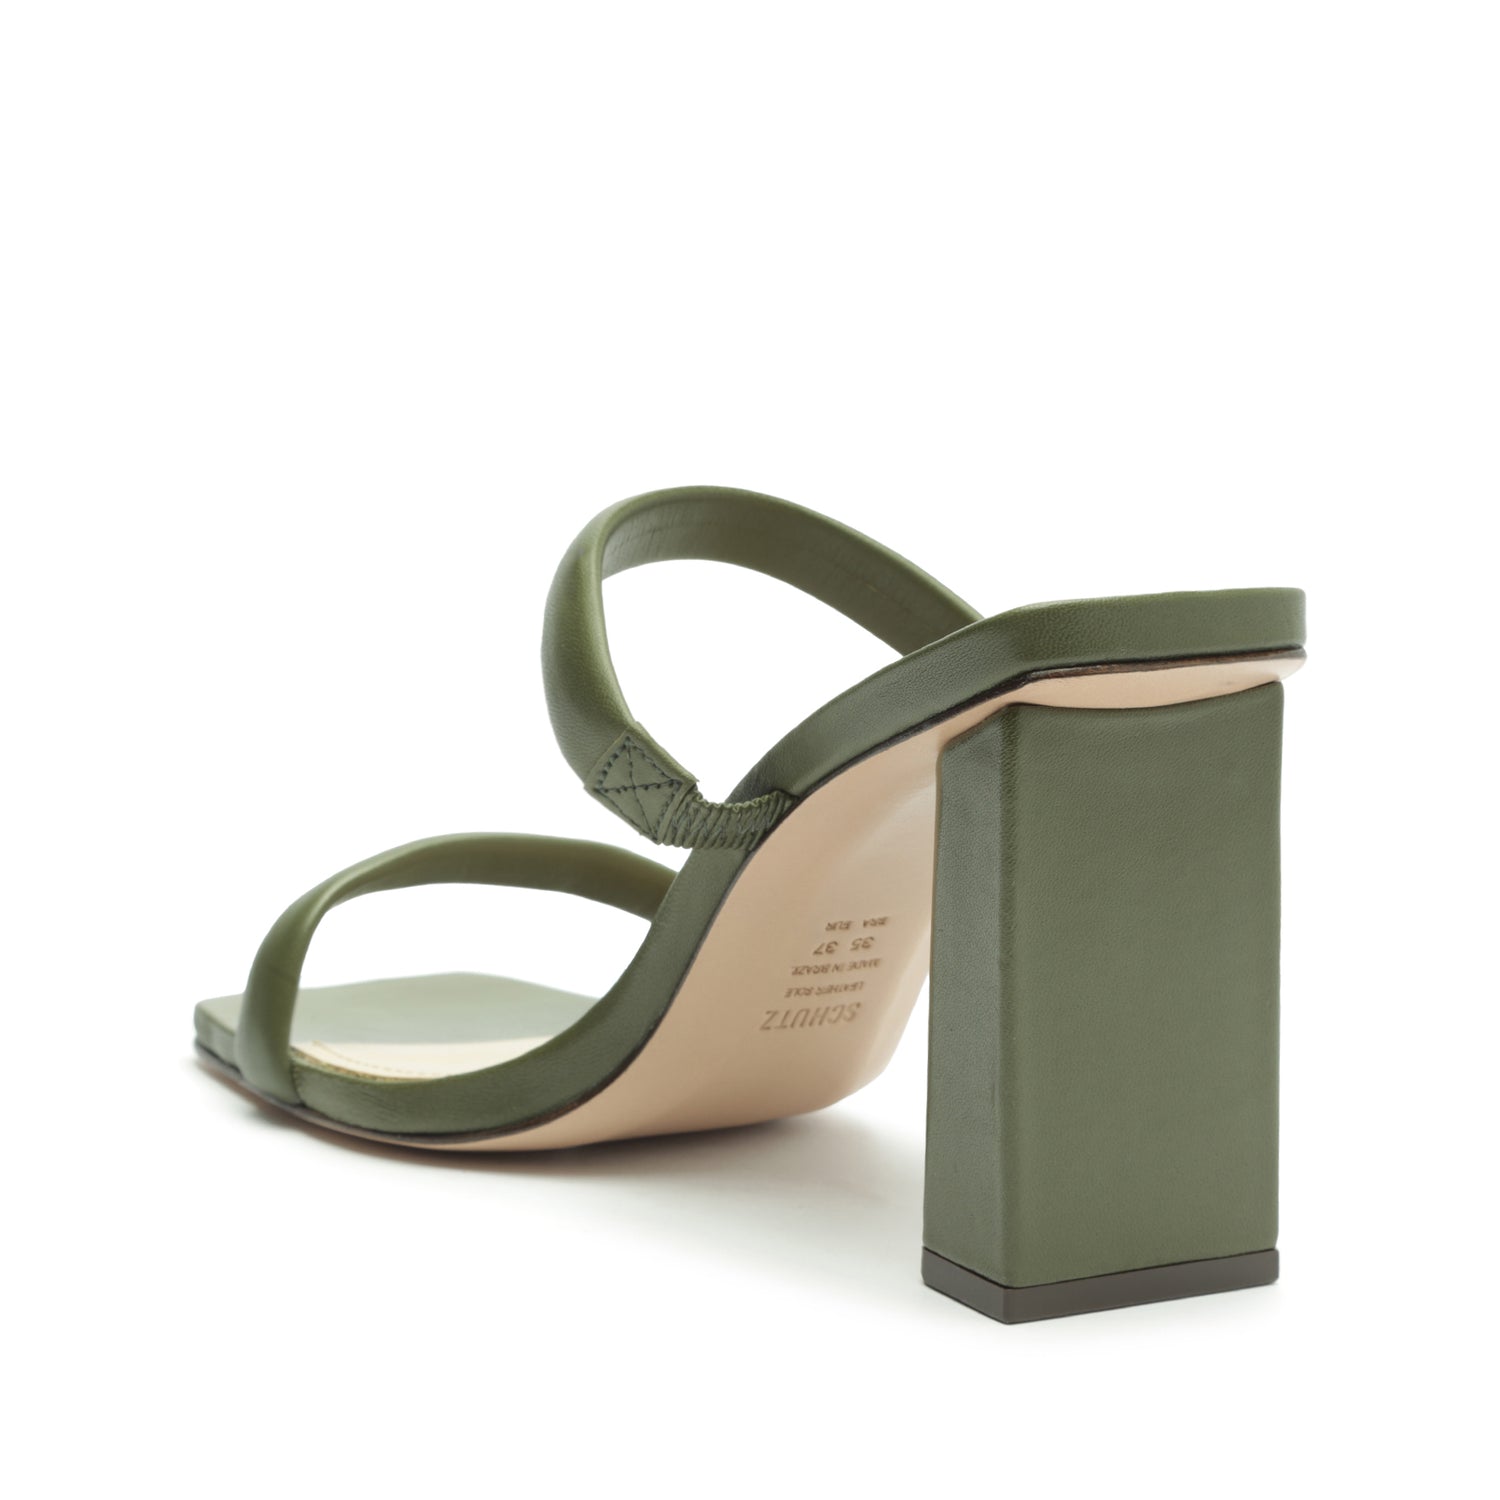 Ully Nappa Leather Sandal Military Green Nappa Leather